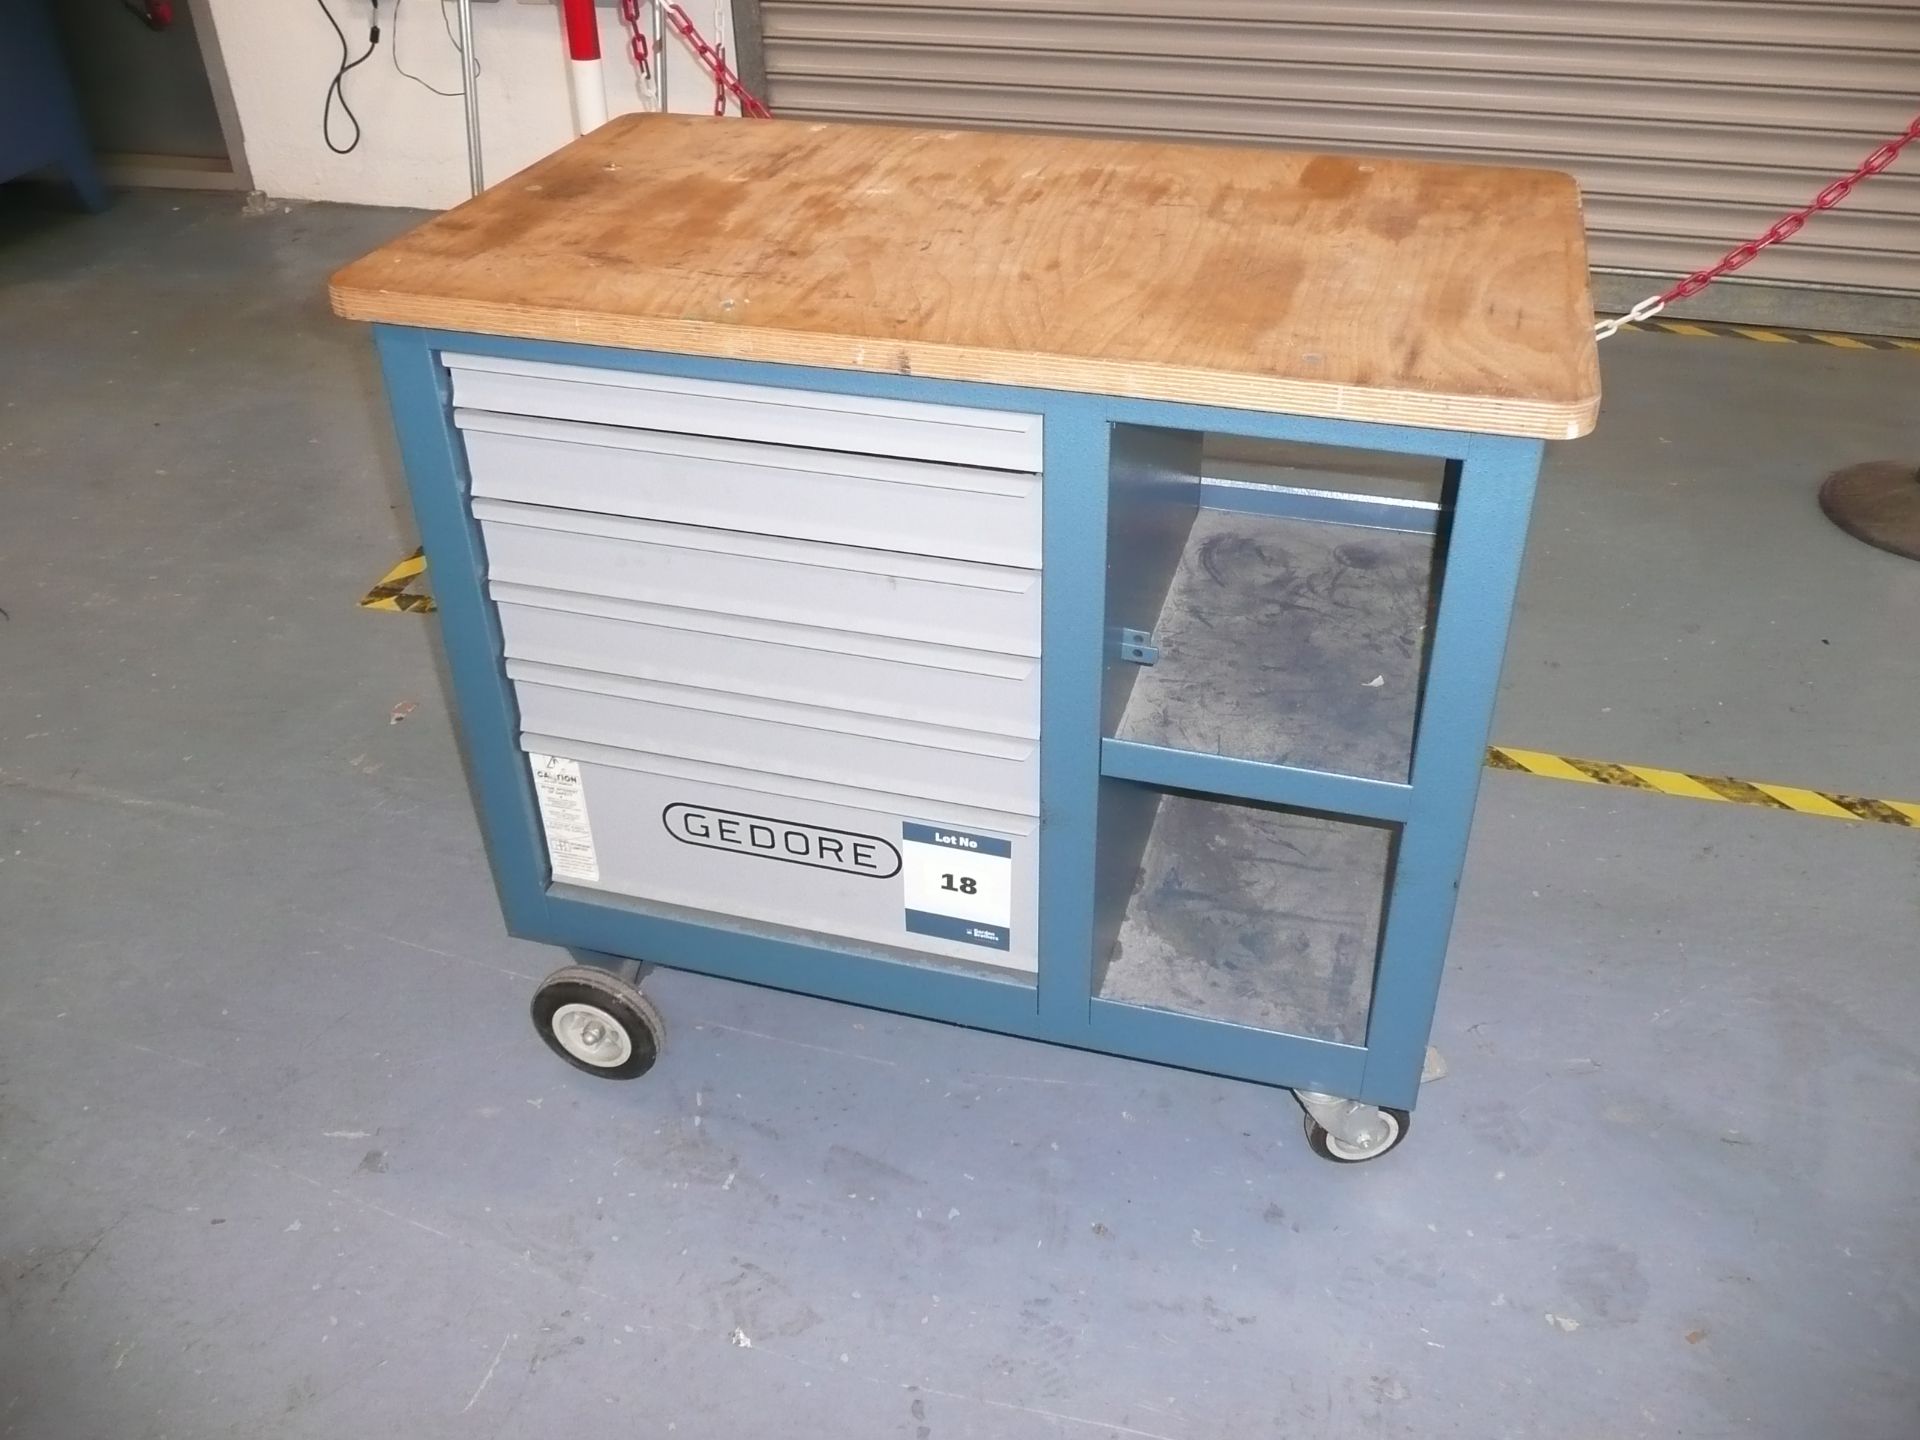 Gedore, mobile garage workbench with six drawer tool storage and two shelves, size 950mm (l) x 550mm